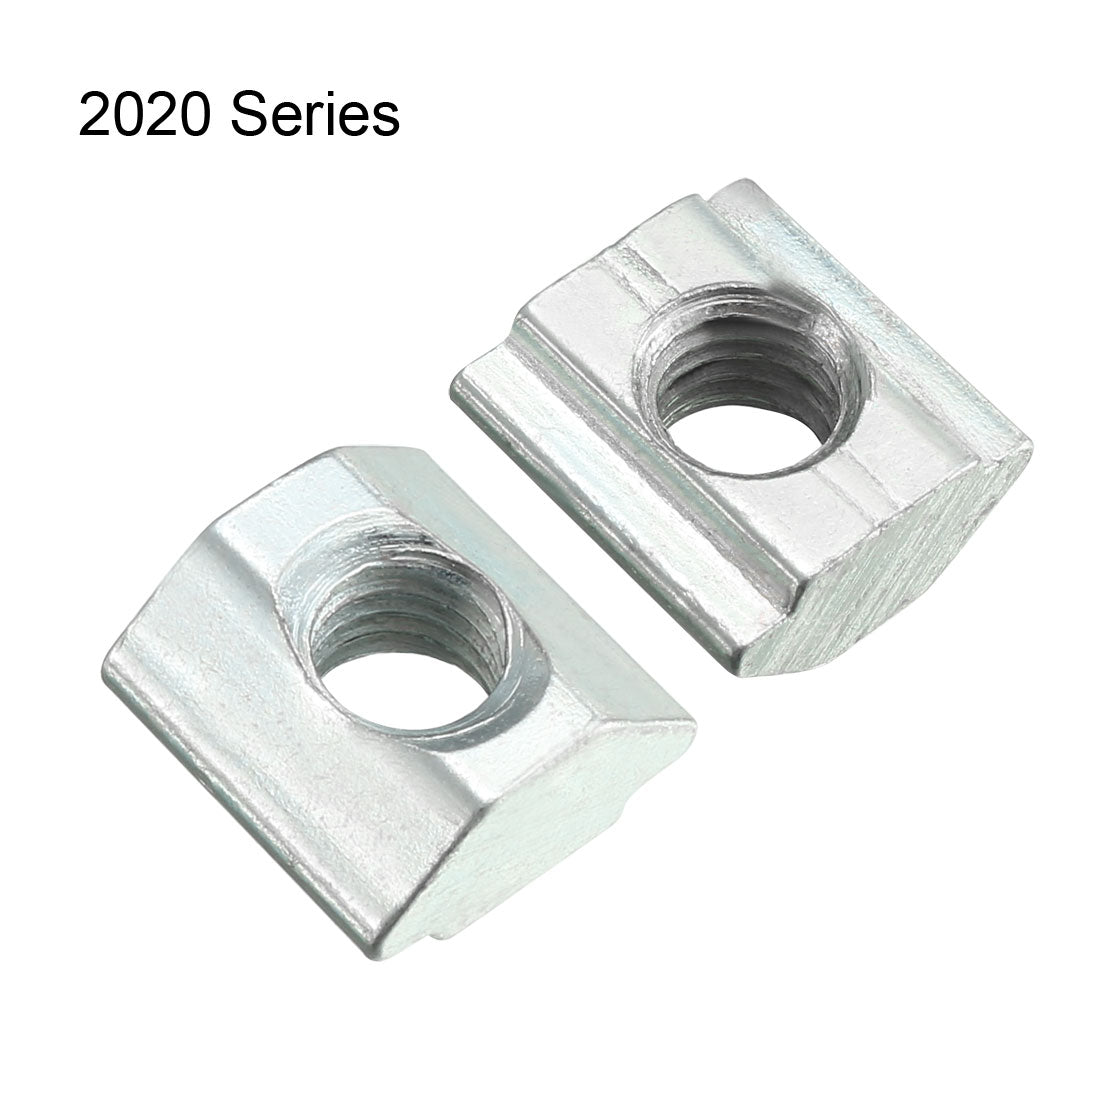 Uxcell Uxcell Slide in T-Nut, M5 Threaded for 2020 Series Aluminum Extrusions Profile 12pcs